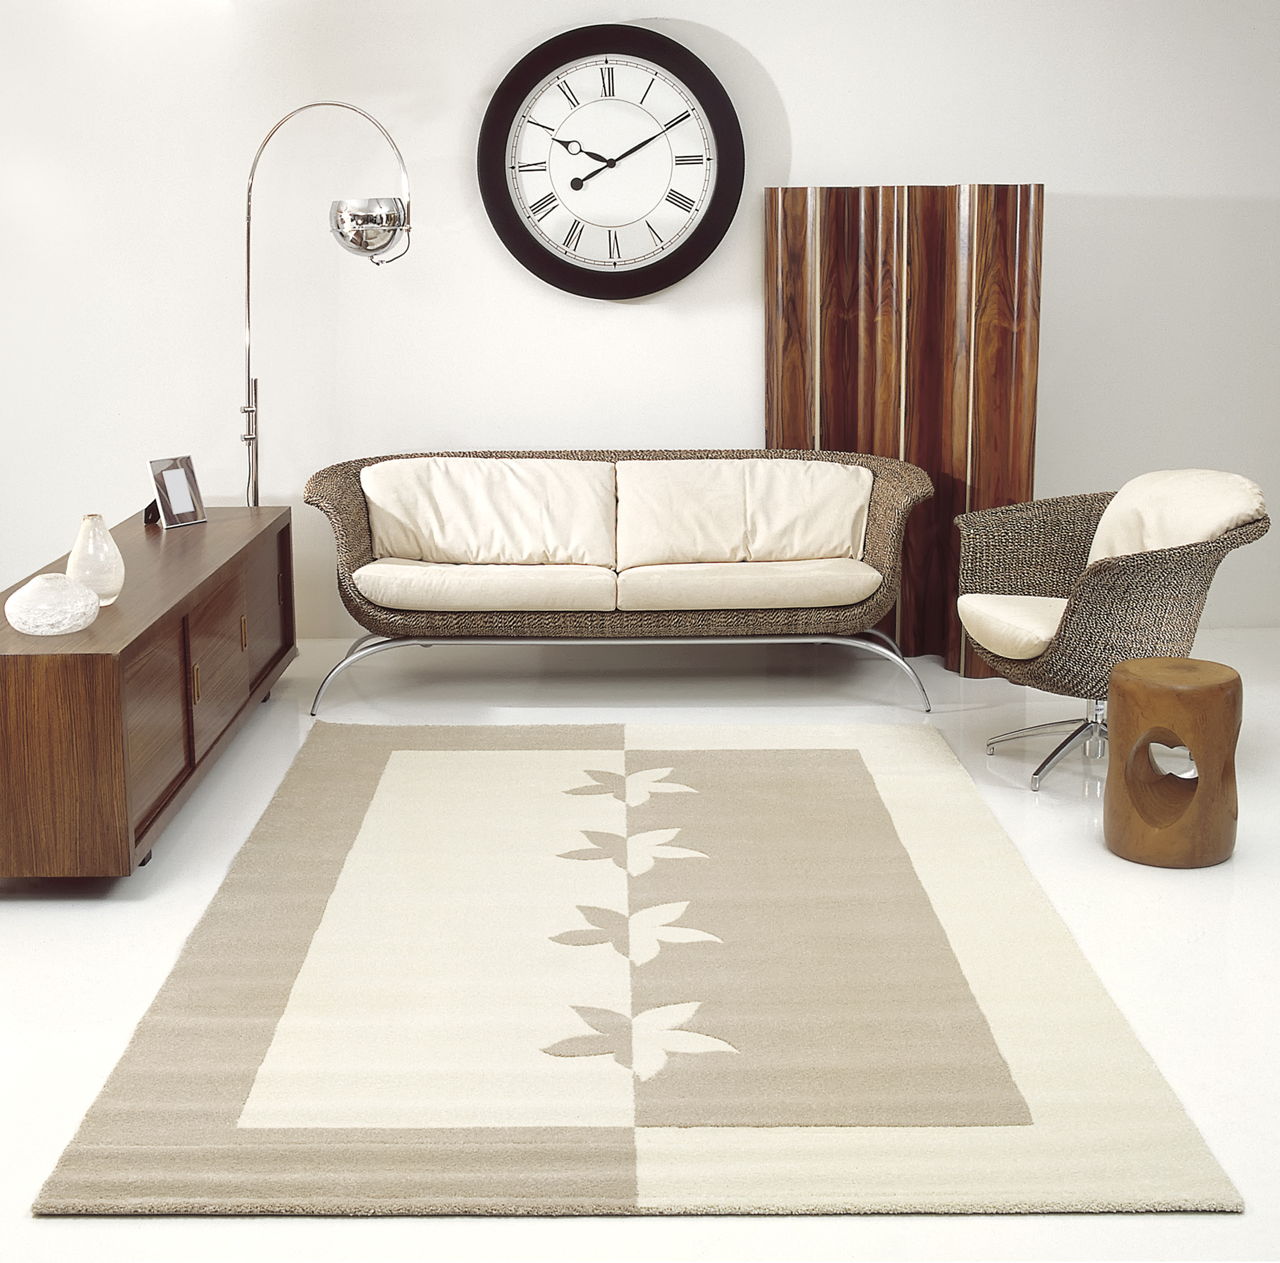 How to Decorate With Area Rugs